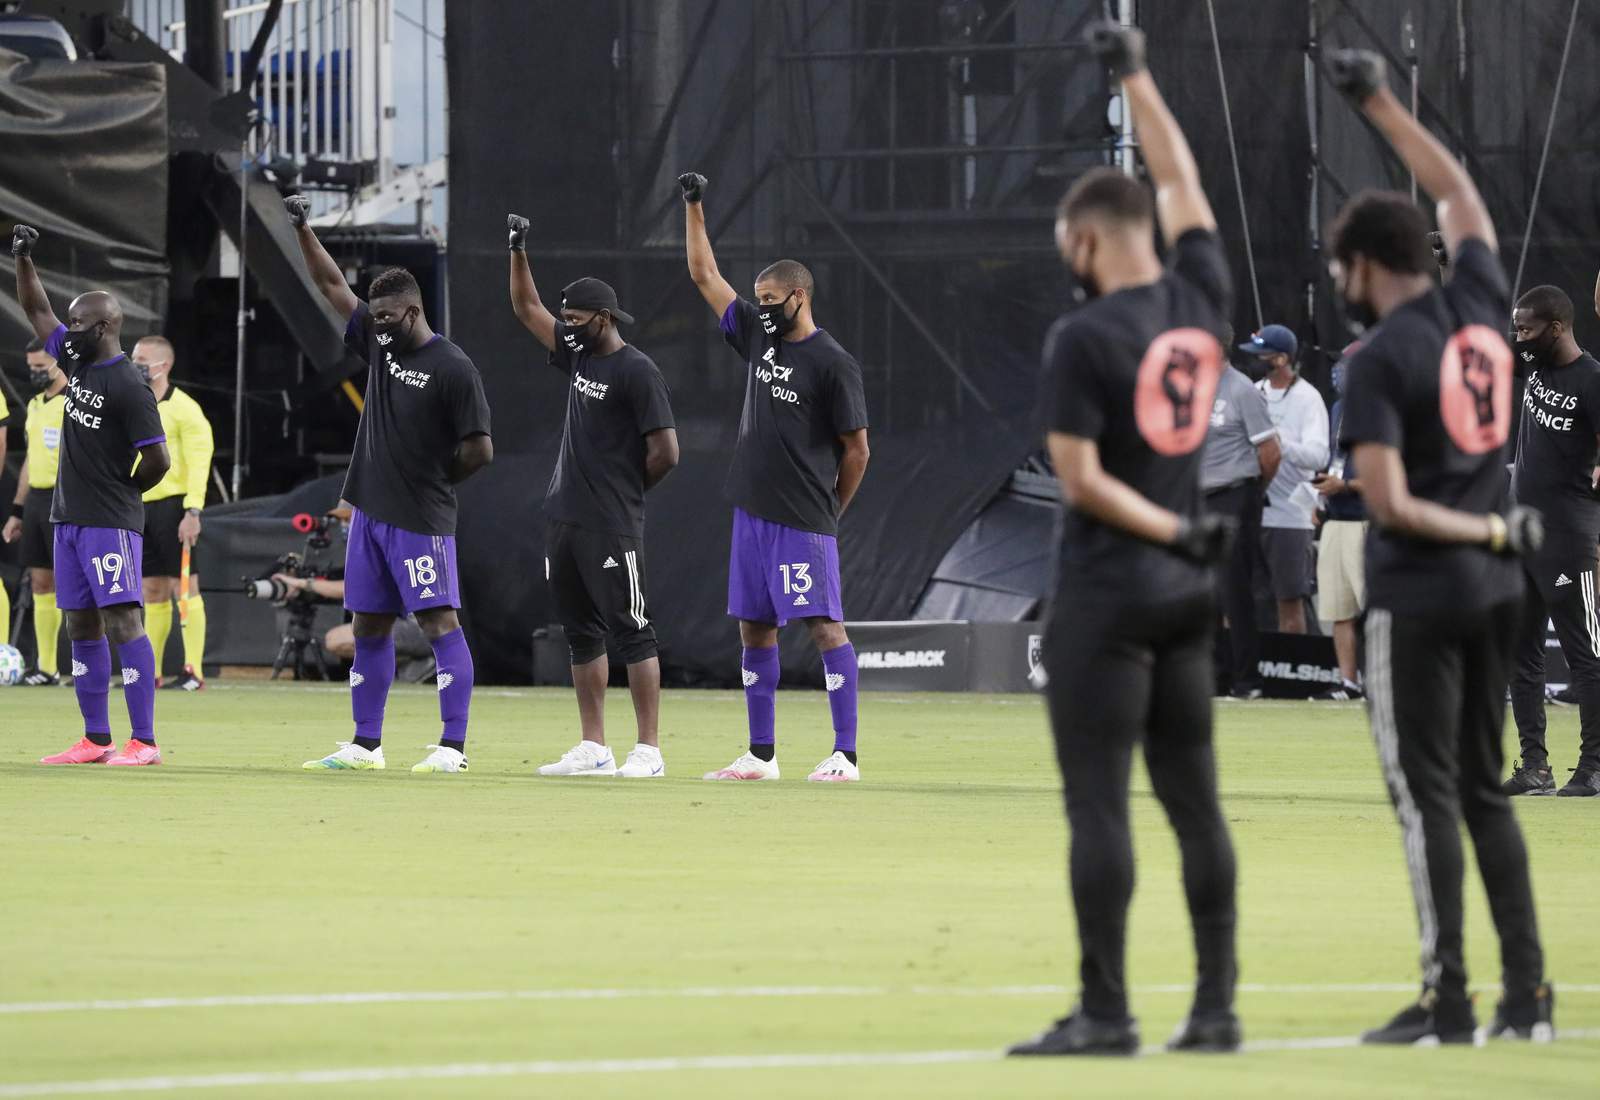 MLS returns to action after poignant moment of silence